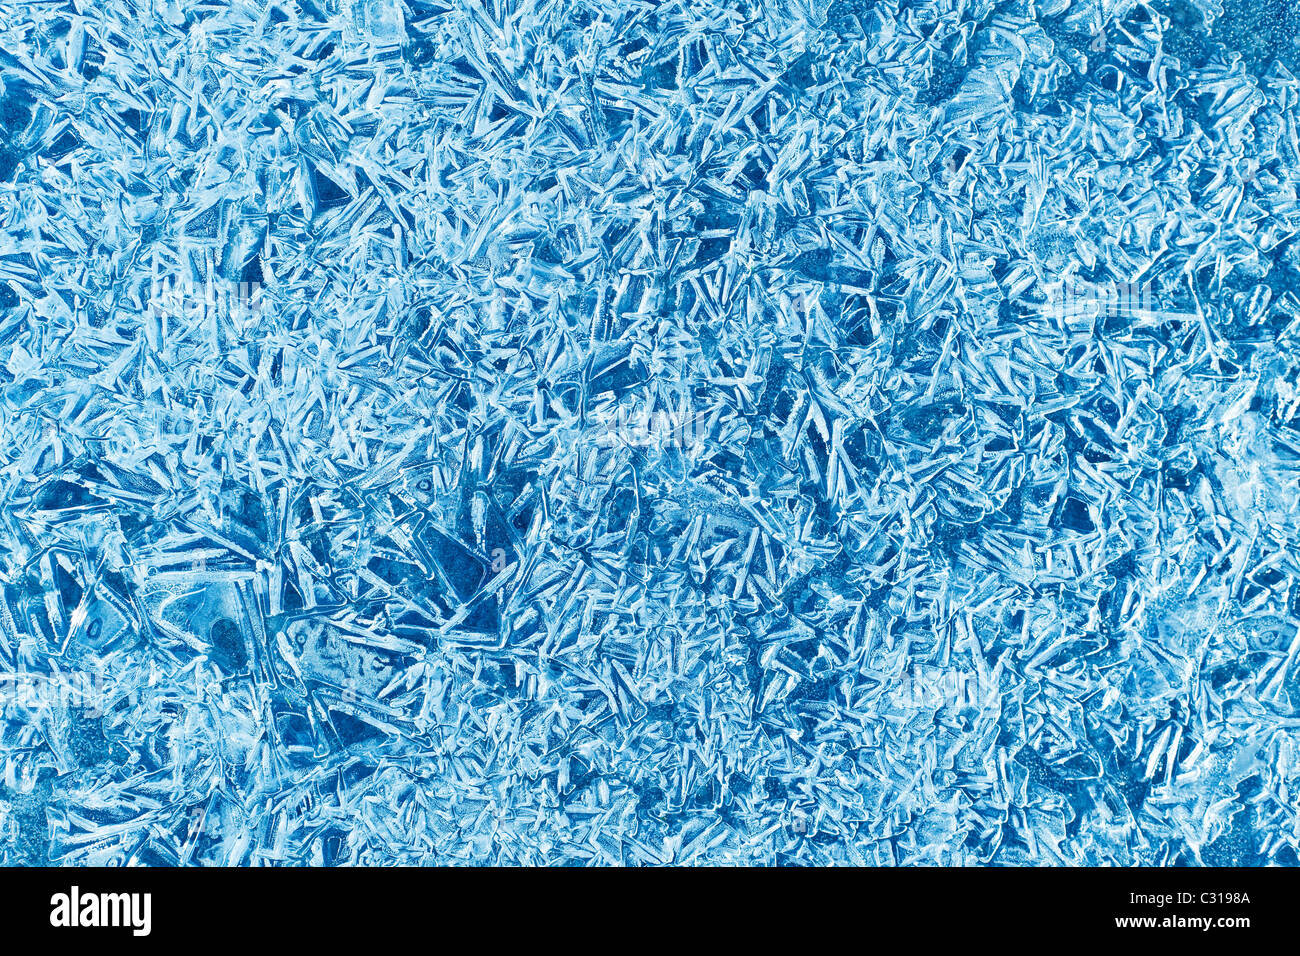 Background image of frozen natural pattern Stock Photo